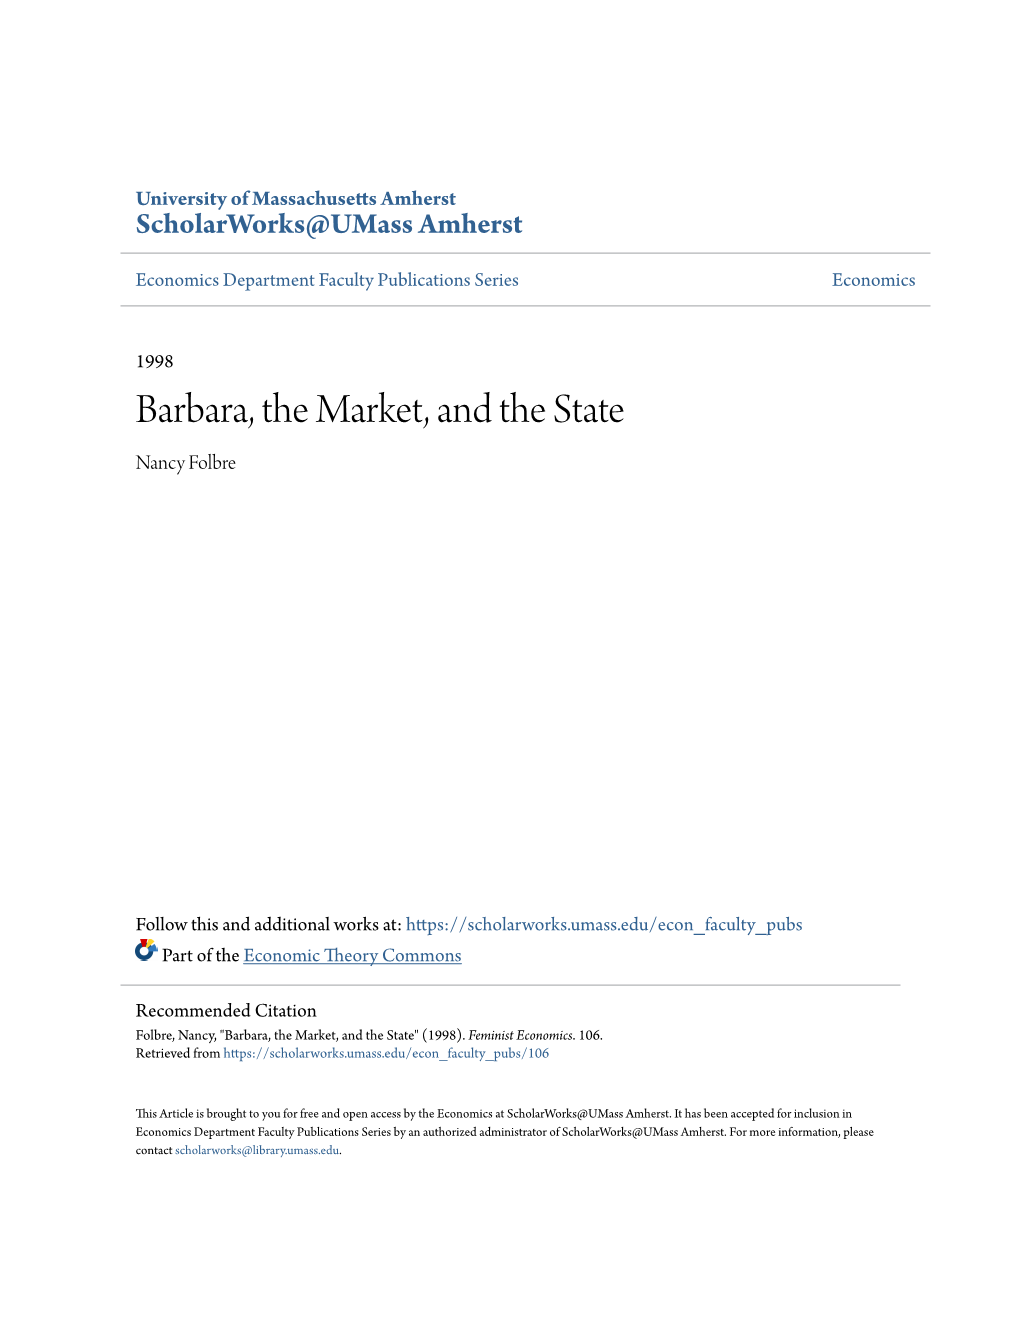 Barbara, the Market, and the State Nancy Folbre